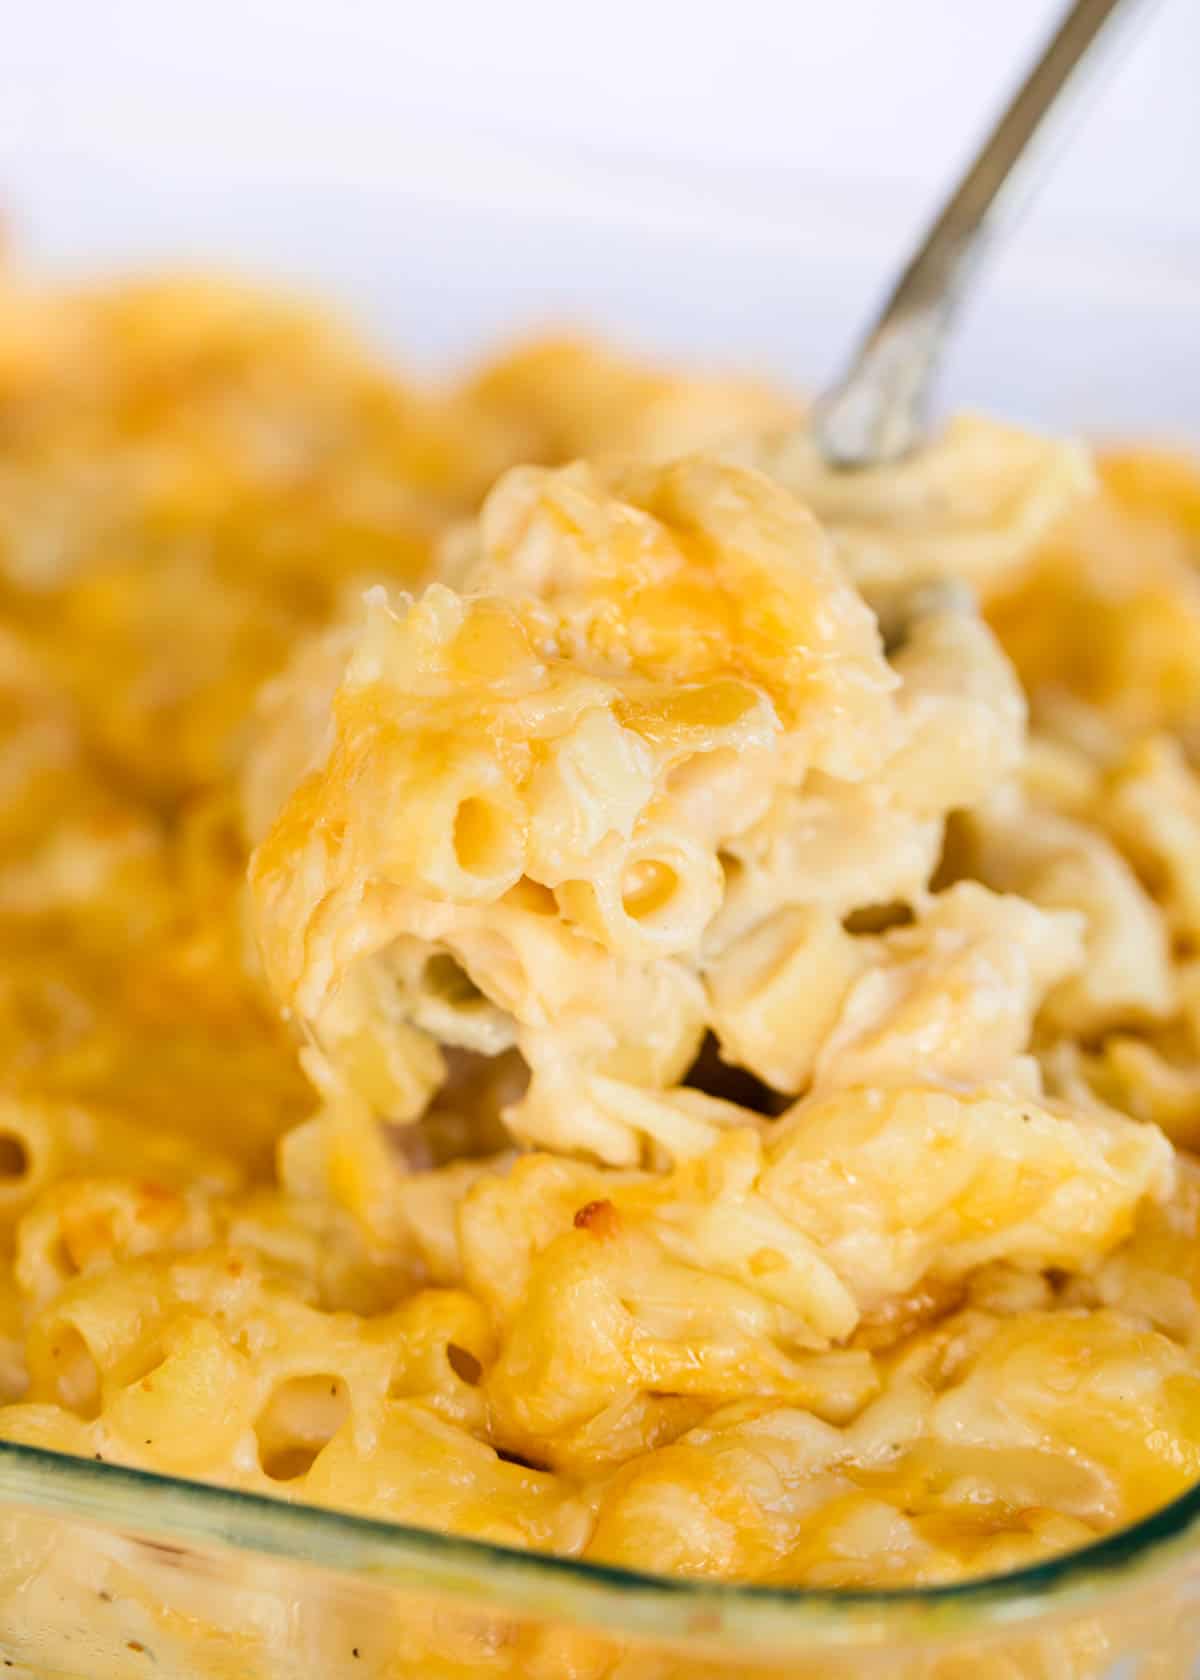 Spoonful of baked macaroni and cheese.